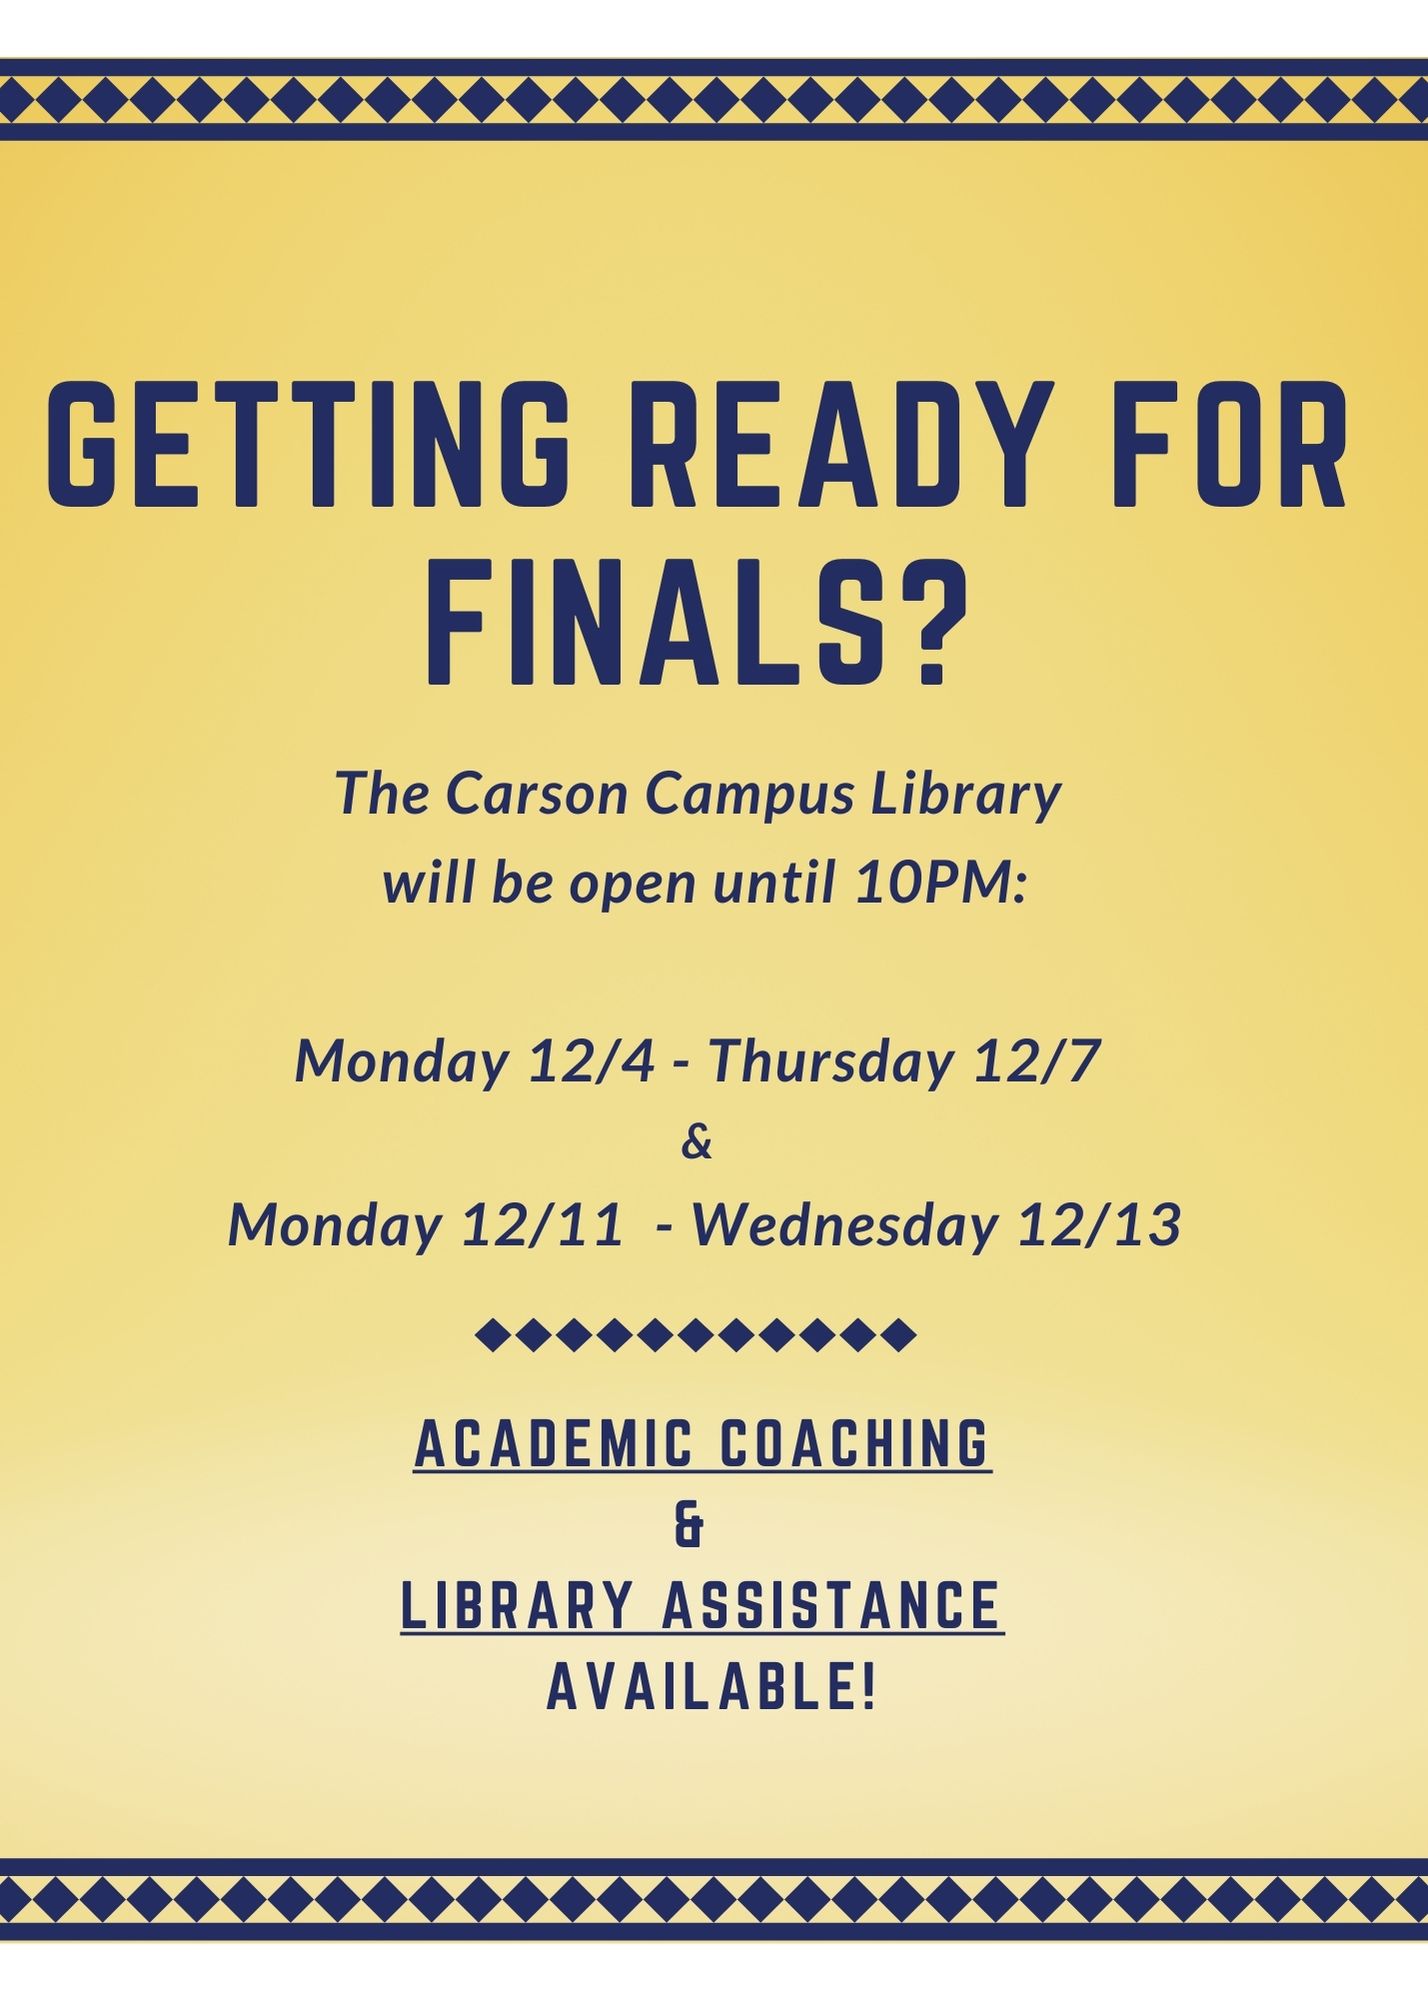 The library will be open until 10 p.m. the week before finals and the week of finals.